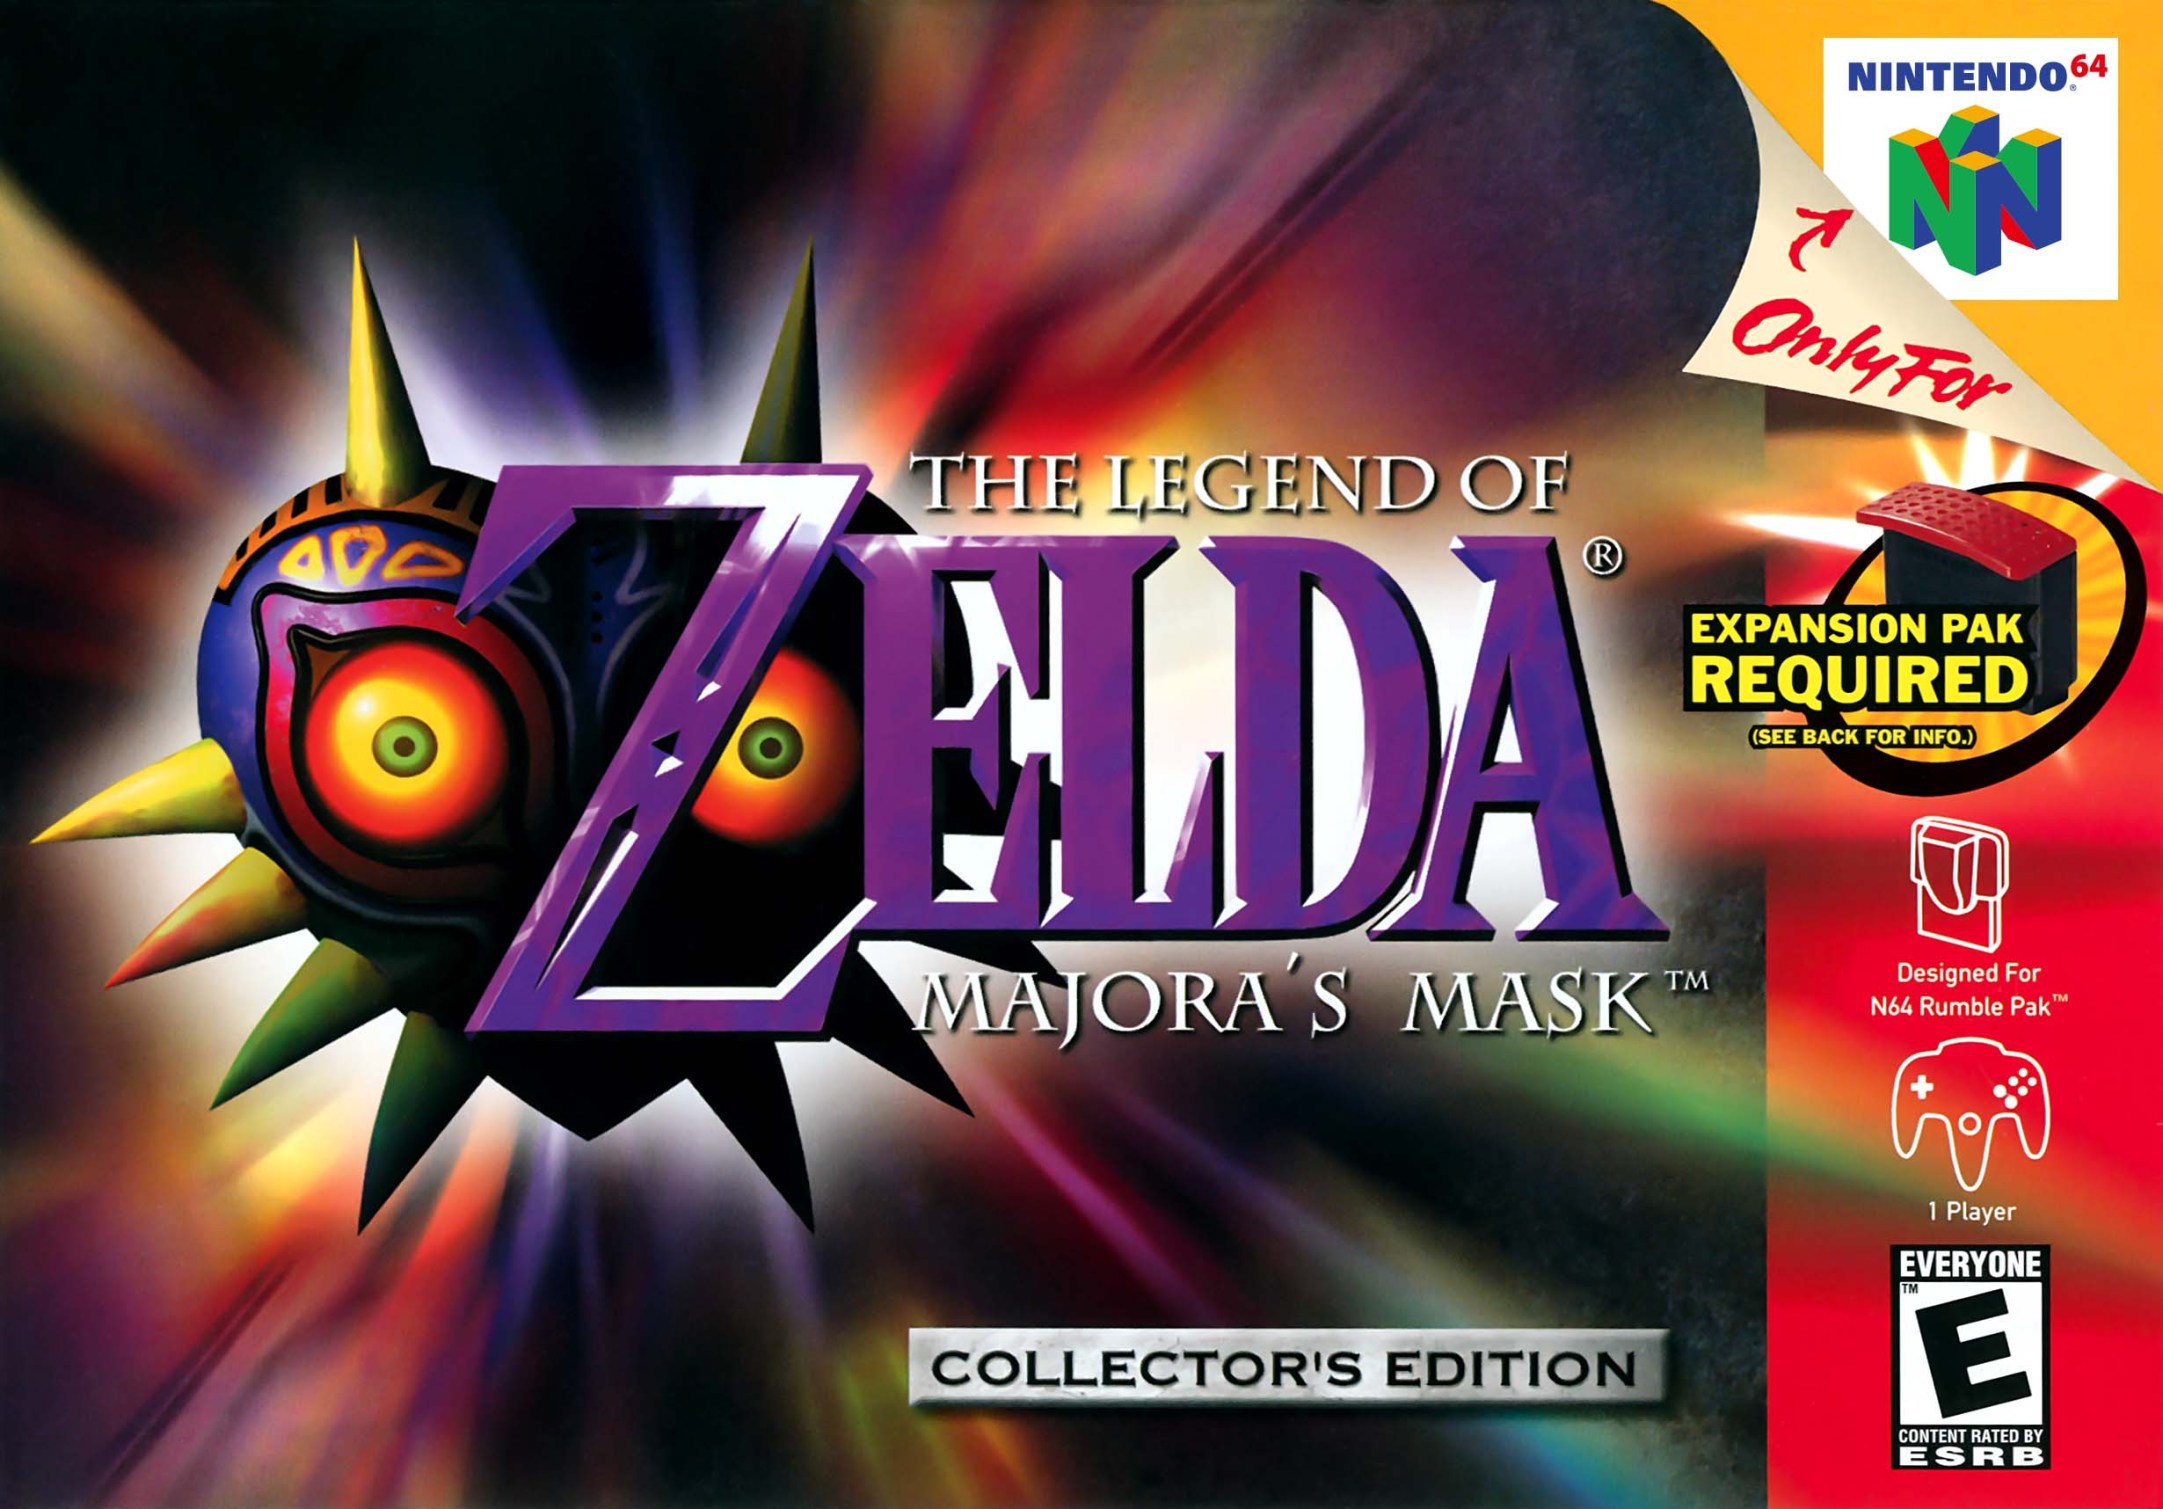 The Legend of Zelda: Majora’s Mask is coming to Nintendo Switch Online + Expansion Pack in February